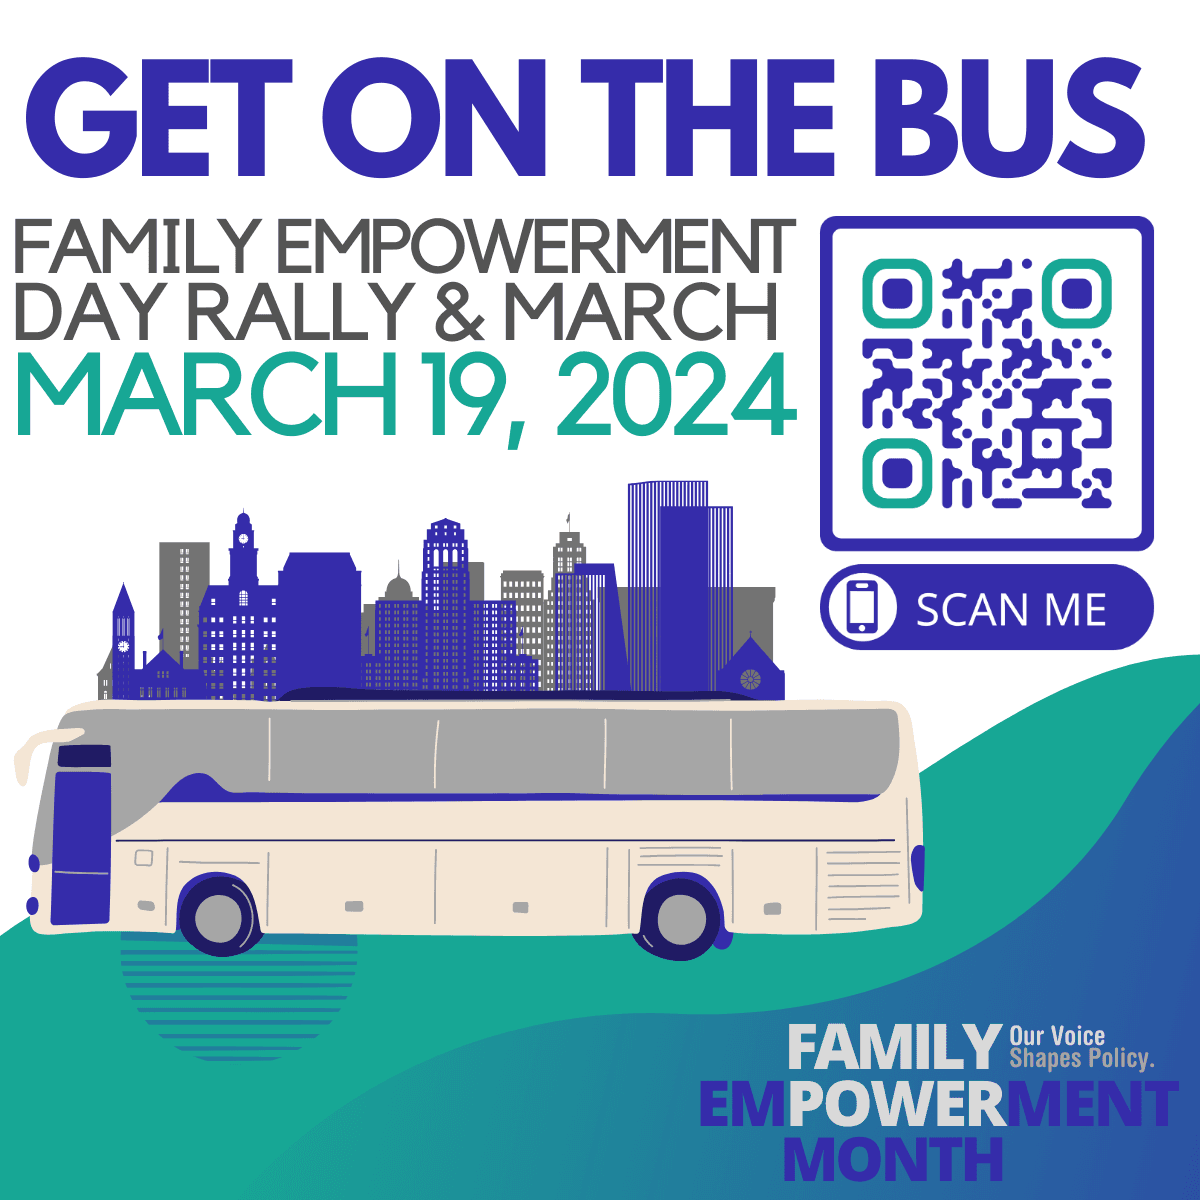 Click here to get on the bus!